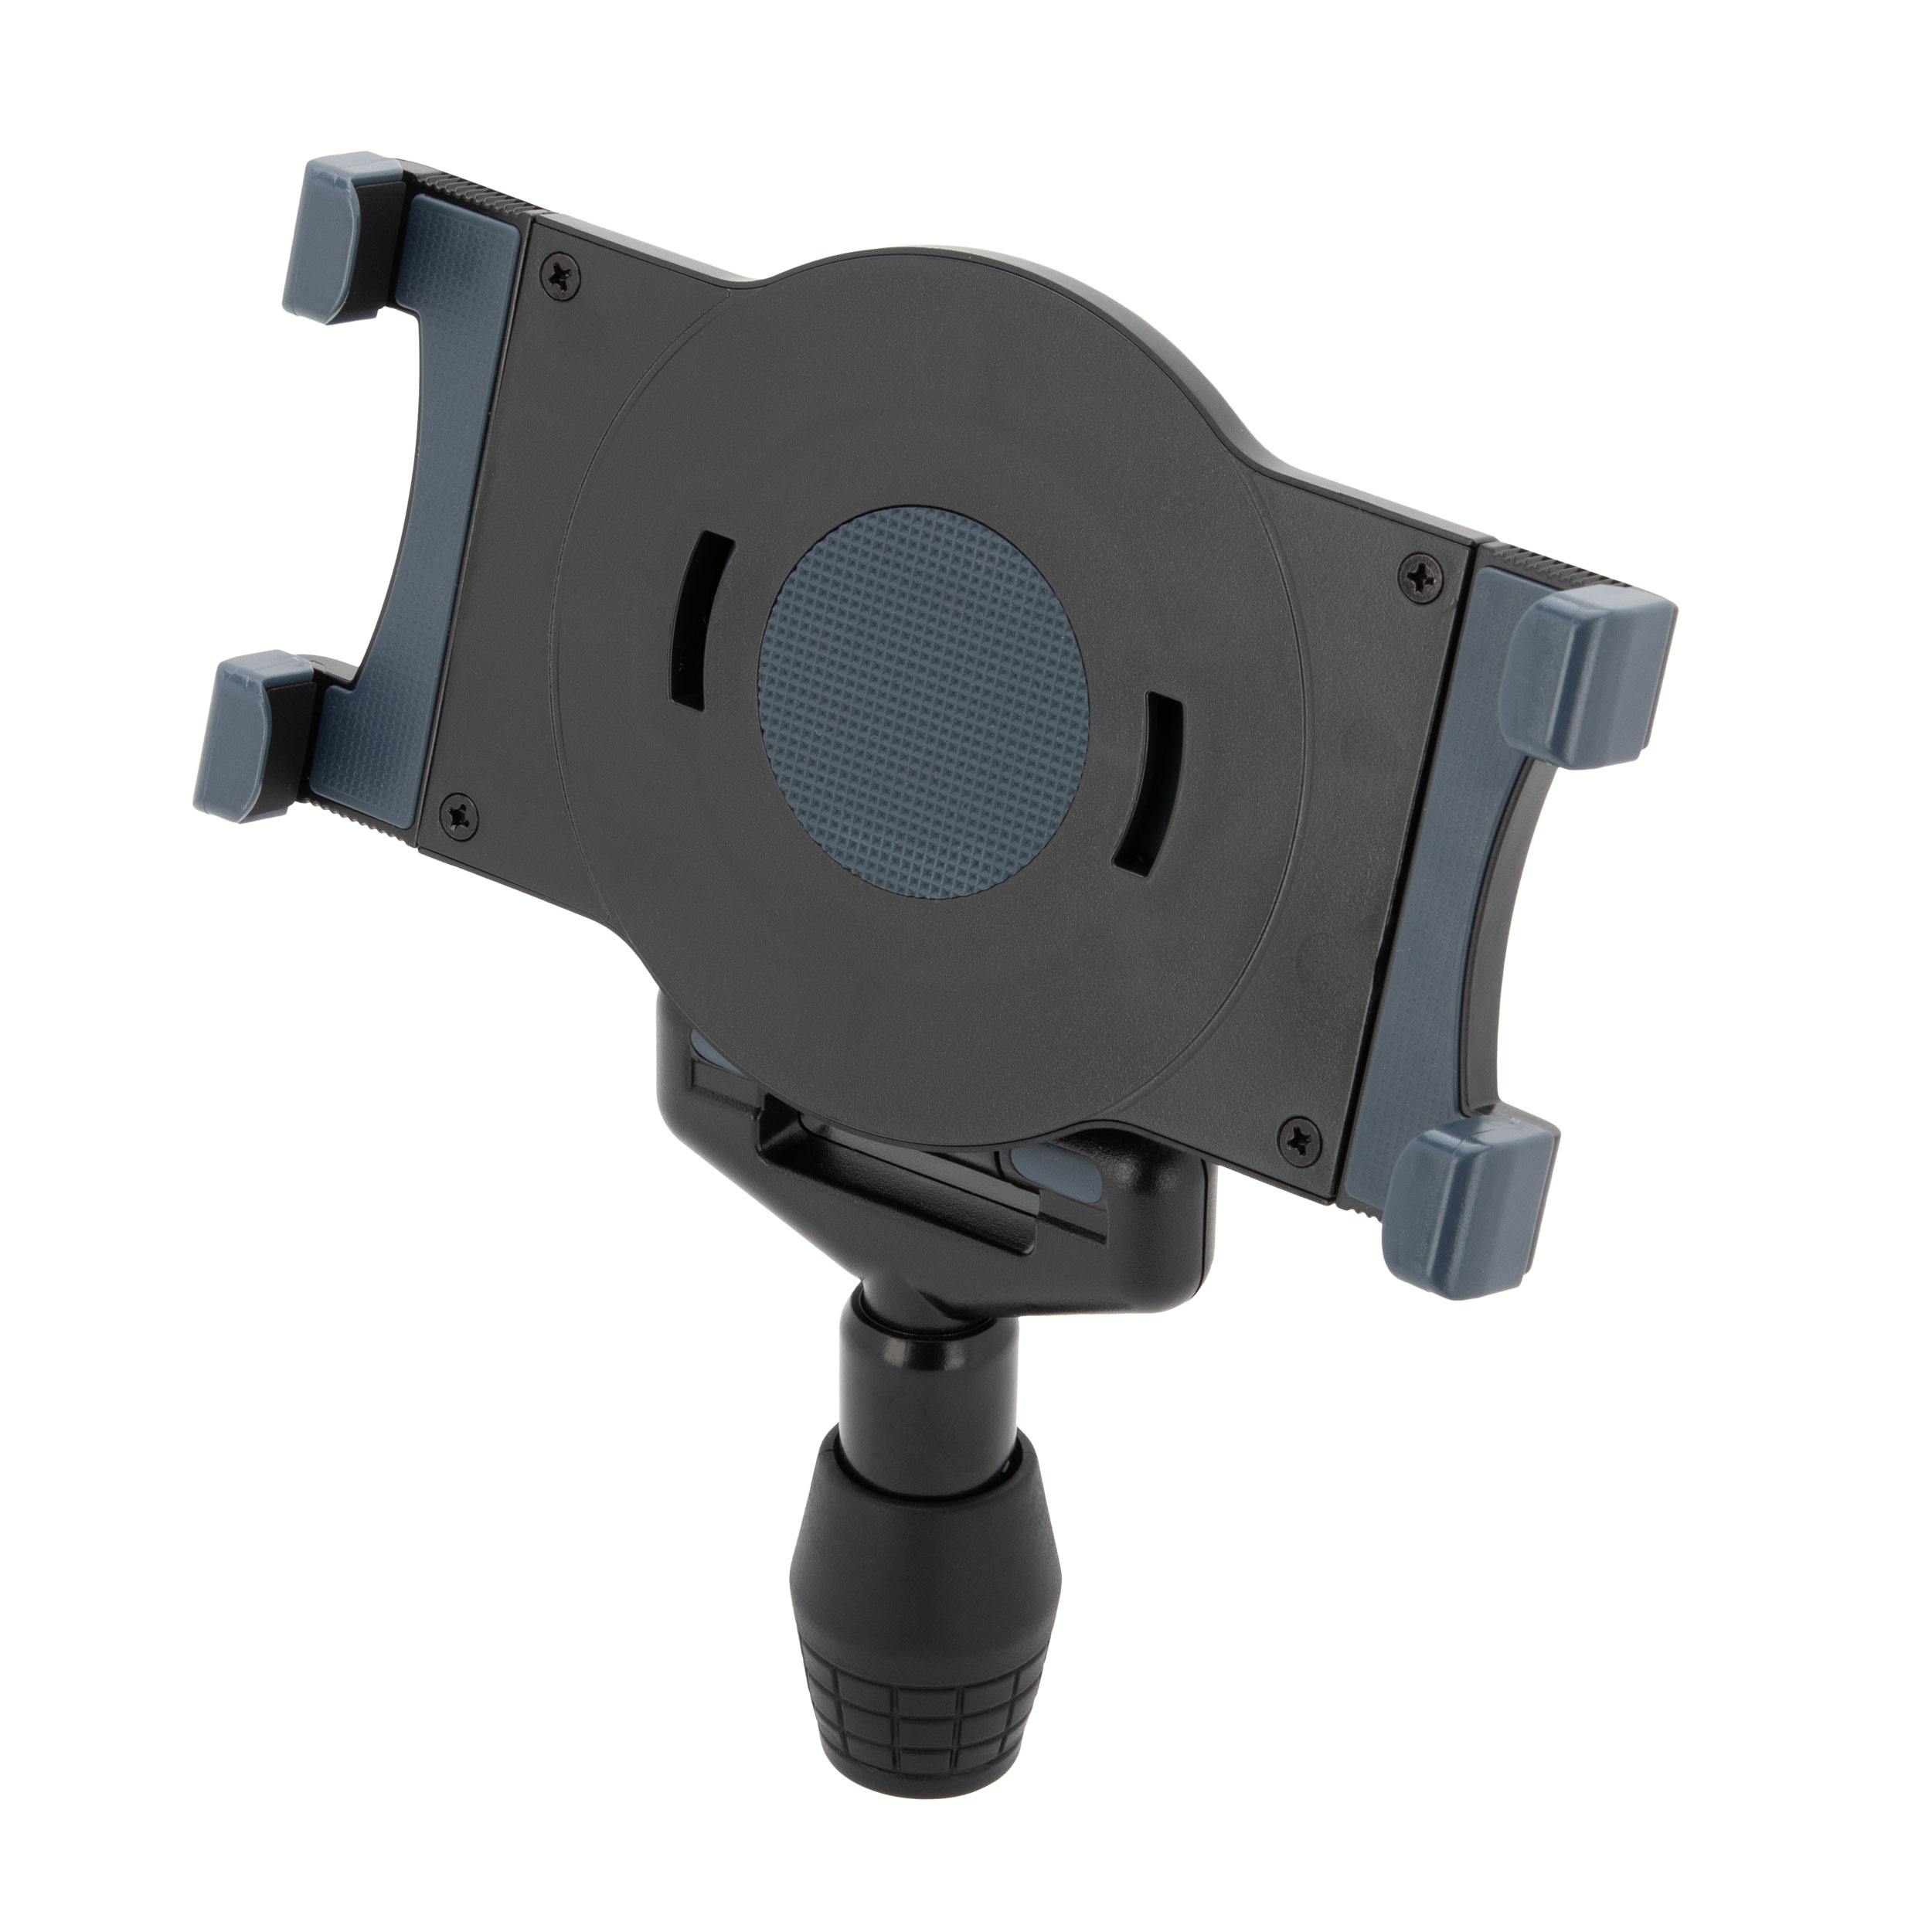 drum-tec holder for tablets, iPad & Android